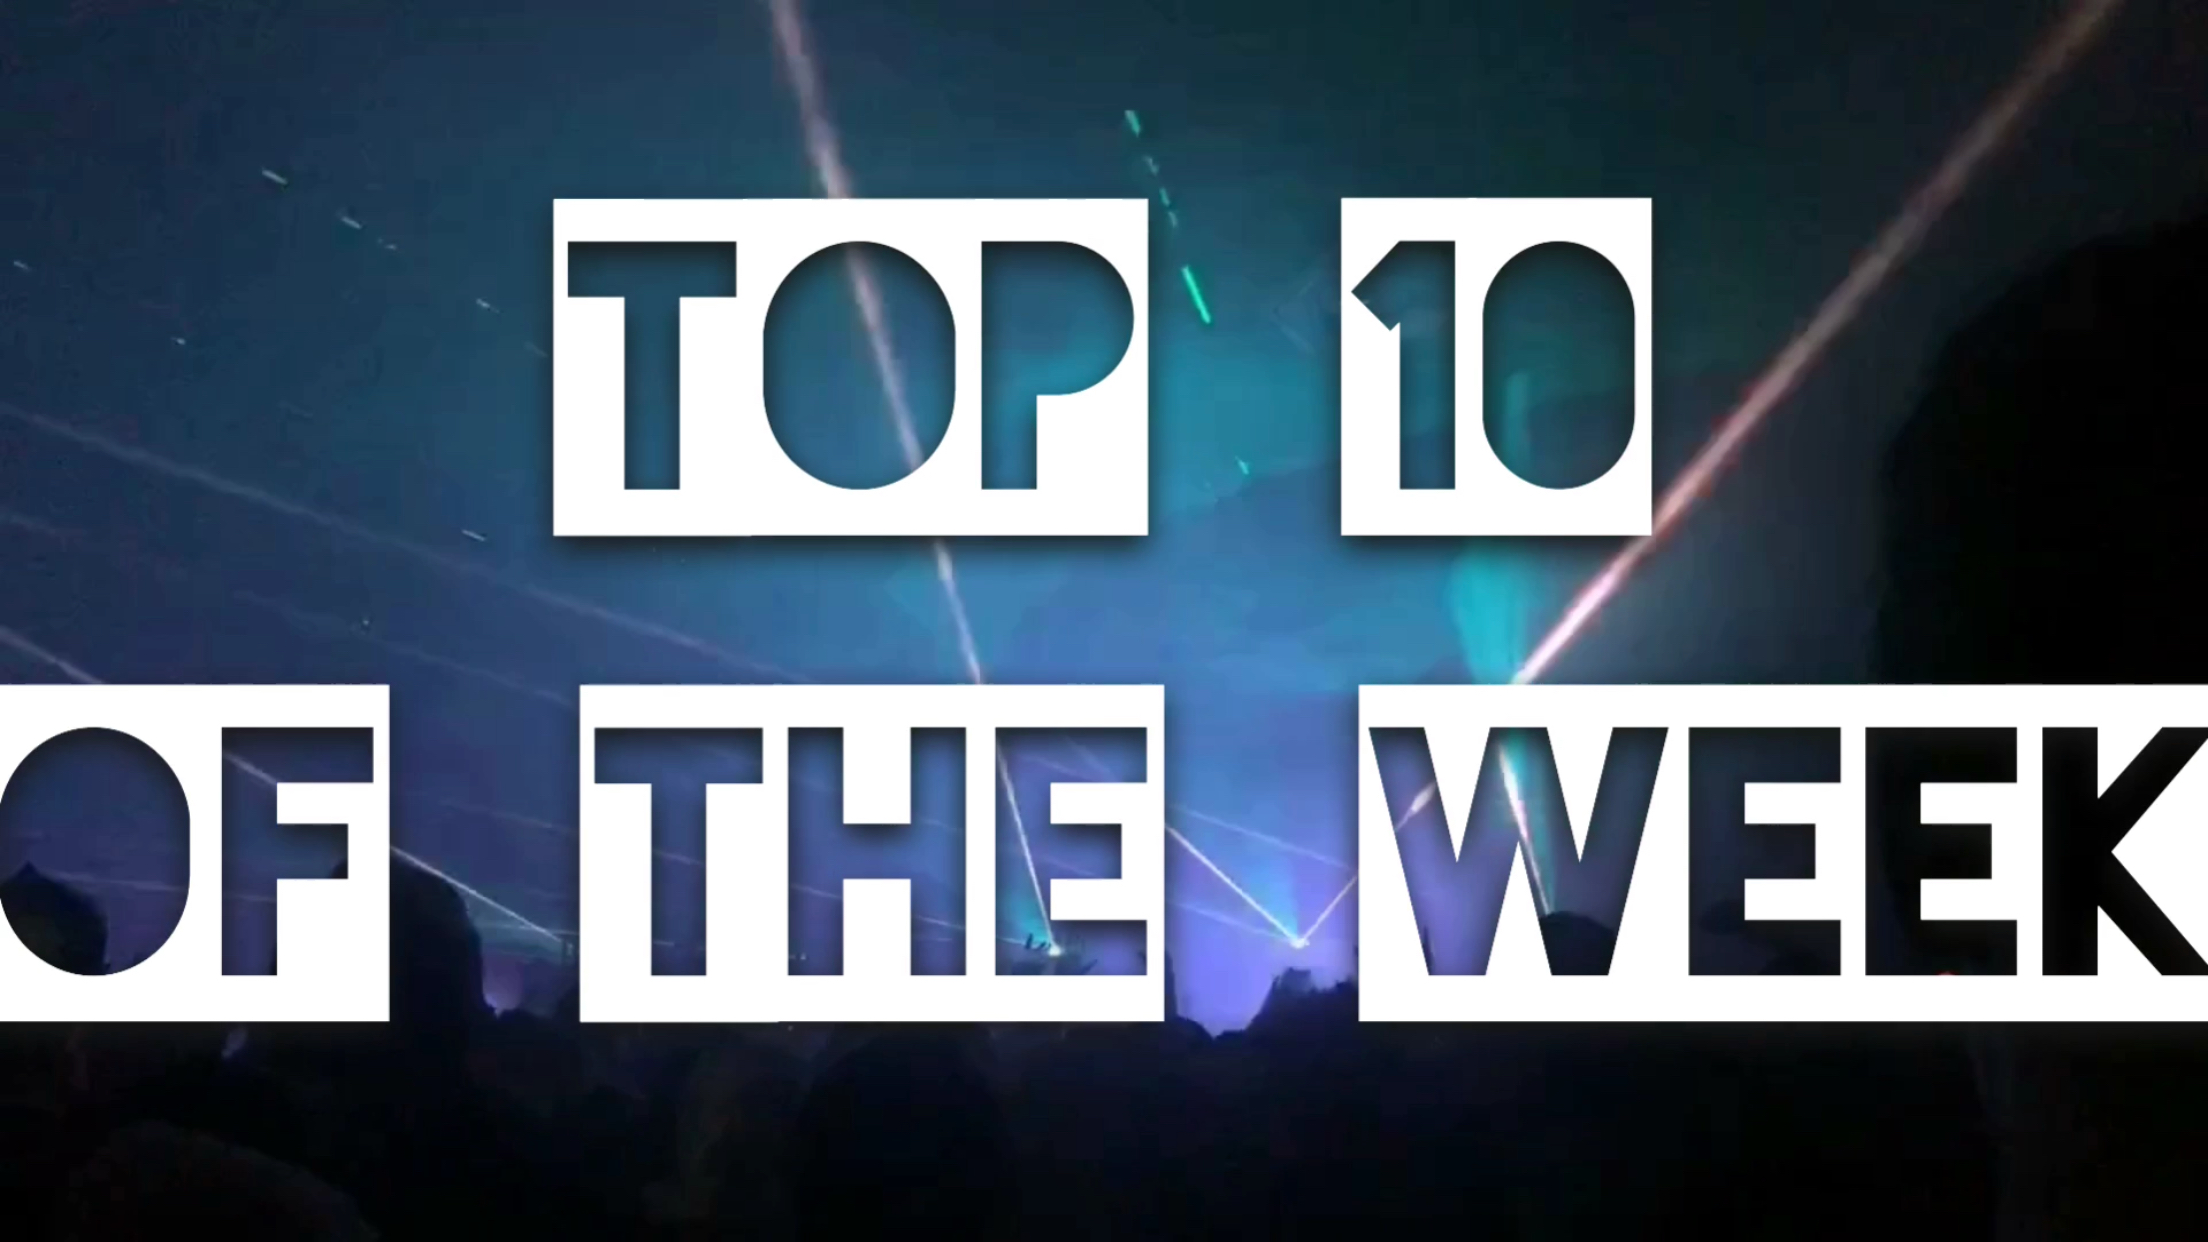 top 10 electronic songs of may 2018 Captone Scala and Kolacny Brothers the royals season finale on E! Tiesto Preme Post Malone Clean Bandit Demi Lovato Loud luxury Dyson Chris Lake Marco LysDJ Sliink Zak Leever Dillon Francis Knife Party Lemaitre